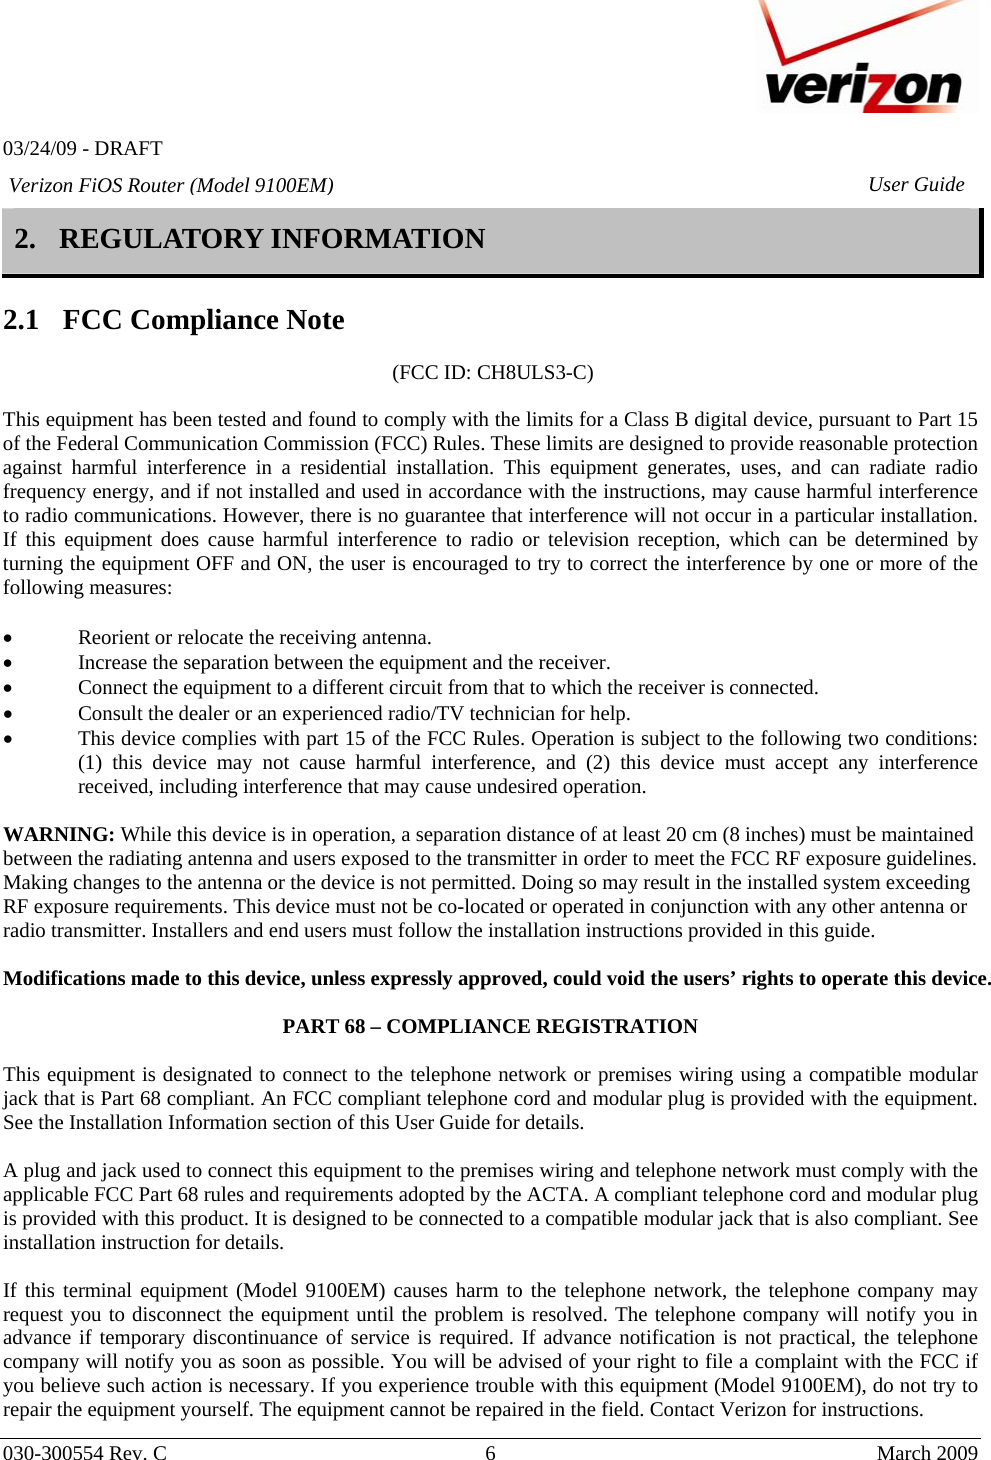   03/24/09 - DRAFT   030-300554 Rev. C  6      March 2009  Verizon FiOS Router (Model 9100EM) User Guide2. REGULATORY INFORMATION   2.1 FCC Compliance Note   (FCC ID: CH8ULS3-C)  This equipment has been tested and found to comply with the limits for a Class B digital device, pursuant to Part 15 of the Federal Communication Commission (FCC) Rules. These limits are designed to provide reasonable protection against harmful interference in a residential installation. This equipment generates, uses, and can radiate radio frequency energy, and if not installed and used in accordance with the instructions, may cause harmful interference to radio communications. However, there is no guarantee that interference will not occur in a particular installation. If this equipment does cause harmful interference to radio or television reception, which can be determined by turning the equipment OFF and ON, the user is encouraged to try to correct the interference by one or more of the following measures:  • Reorient or relocate the receiving antenna. • Increase the separation between the equipment and the receiver. • Connect the equipment to a different circuit from that to which the receiver is connected. • Consult the dealer or an experienced radio/TV technician for help. • This device complies with part 15 of the FCC Rules. Operation is subject to the following two conditions: (1) this device may not cause harmful interference, and (2) this device must accept any interference received, including interference that may cause undesired operation.  WARNING: While this device is in operation, a separation distance of at least 20 cm (8 inches) must be maintained between the radiating antenna and users exposed to the transmitter in order to meet the FCC RF exposure guidelines. Making changes to the antenna or the device is not permitted. Doing so may result in the installed system exceeding RF exposure requirements. This device must not be co-located or operated in conjunction with any other antenna or radio transmitter. Installers and end users must follow the installation instructions provided in this guide.  Modifications made to this device, unless expressly approved, could void the users’ rights to operate this device.  PART 68 – COMPLIANCE REGISTRATION  This equipment is designated to connect to the telephone network or premises wiring using a compatible modular jack that is Part 68 compliant. An FCC compliant telephone cord and modular plug is provided with the equipment. See the Installation Information section of this User Guide for details.   A plug and jack used to connect this equipment to the premises wiring and telephone network must comply with the applicable FCC Part 68 rules and requirements adopted by the ACTA. A compliant telephone cord and modular plug is provided with this product. It is designed to be connected to a compatible modular jack that is also compliant. See installation instruction for details.  If this terminal equipment (Model 9100EM) causes harm to the telephone network, the telephone company may request you to disconnect the equipment until the problem is resolved. The telephone company will notify you in advance if temporary discontinuance of service is required. If advance notification is not practical, the telephone company will notify you as soon as possible. You will be advised of your right to file a complaint with the FCC if you believe such action is necessary. If you experience trouble with this equipment (Model 9100EM), do not try to repair the equipment yourself. The equipment cannot be repaired in the field. Contact Verizon for instructions. 